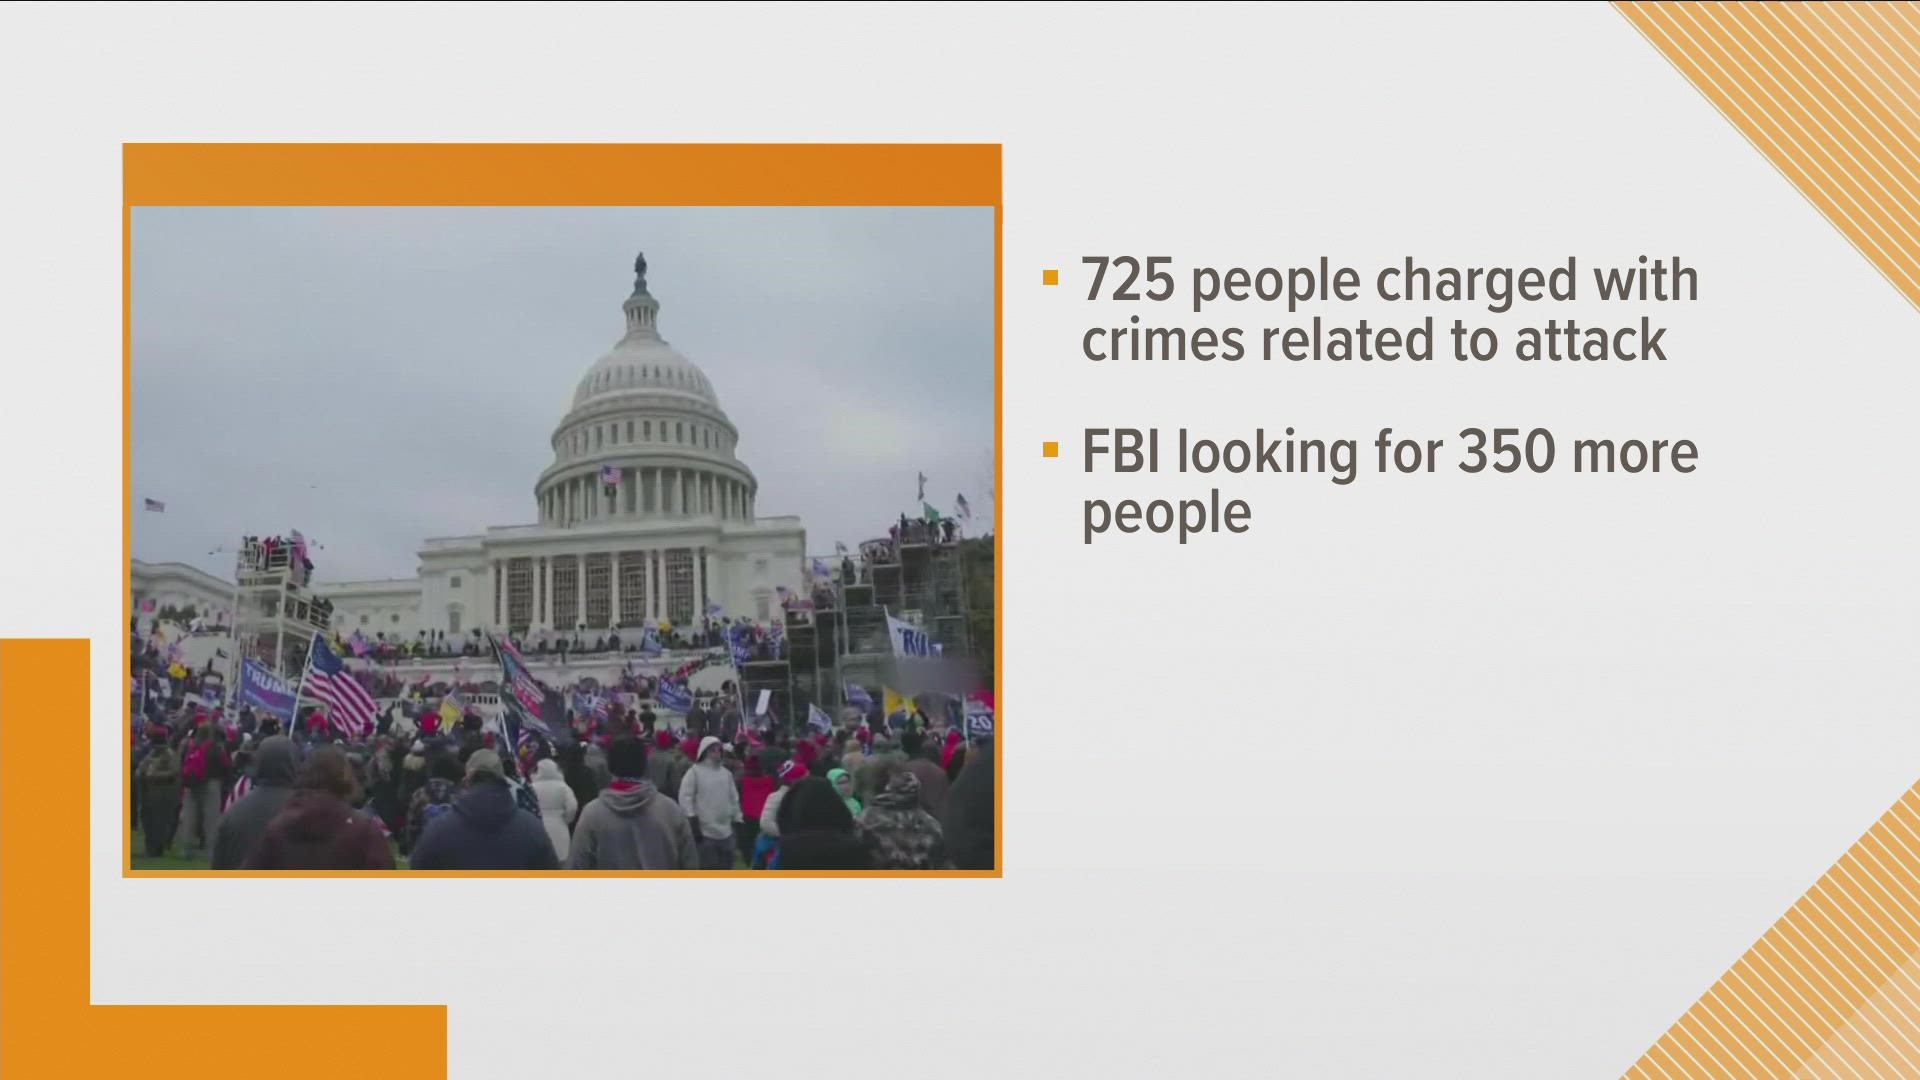 Five people, including a Capitol Hill officer, died from the riot. Since then, 725 people have been charged with crimes related to the attack.